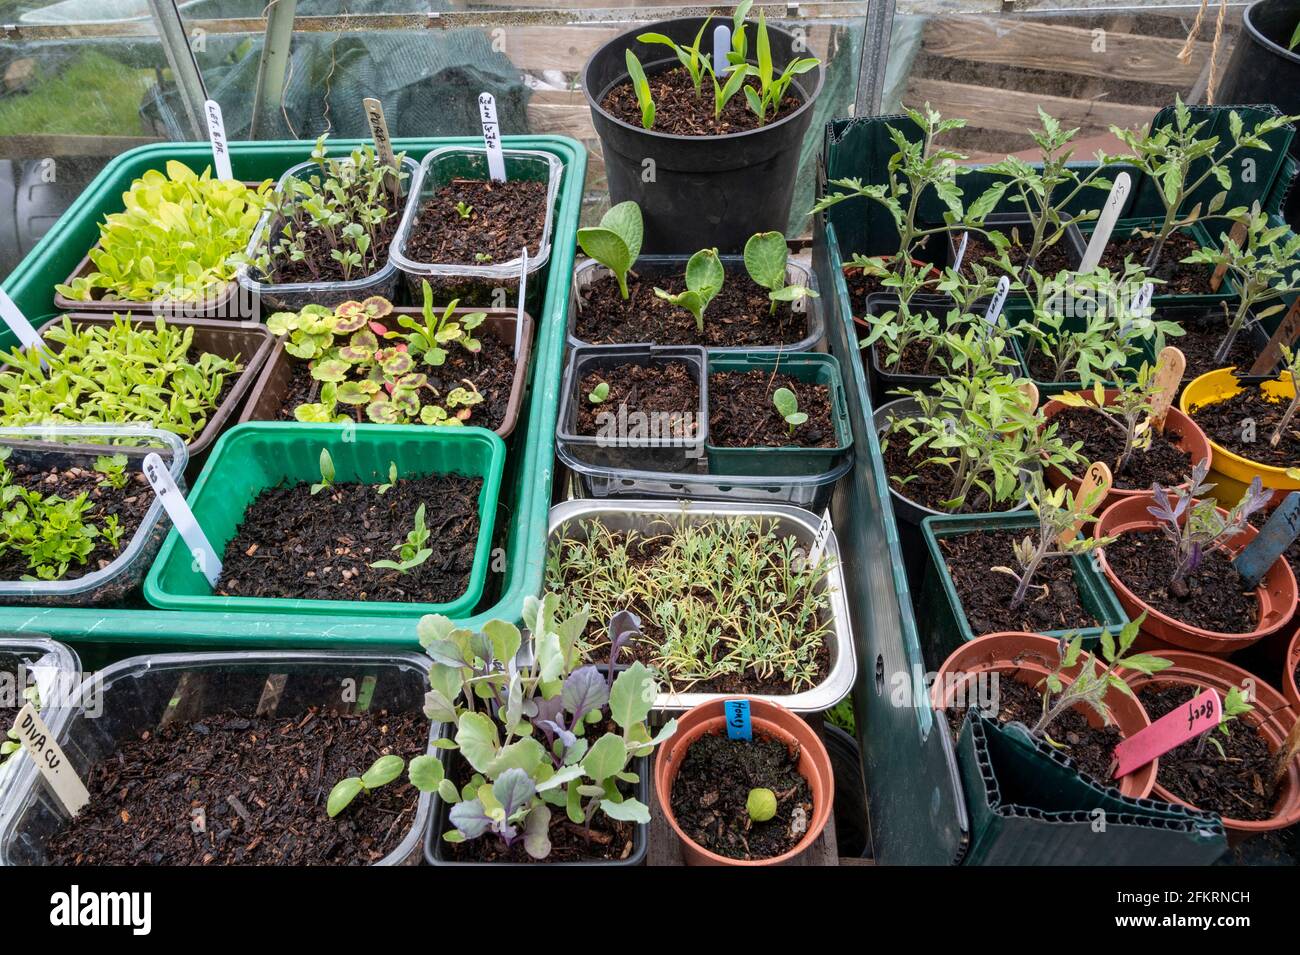 A variety of vegetable and flower seedlings growing in re-cycled food containers and and plant pots. Stock Photo